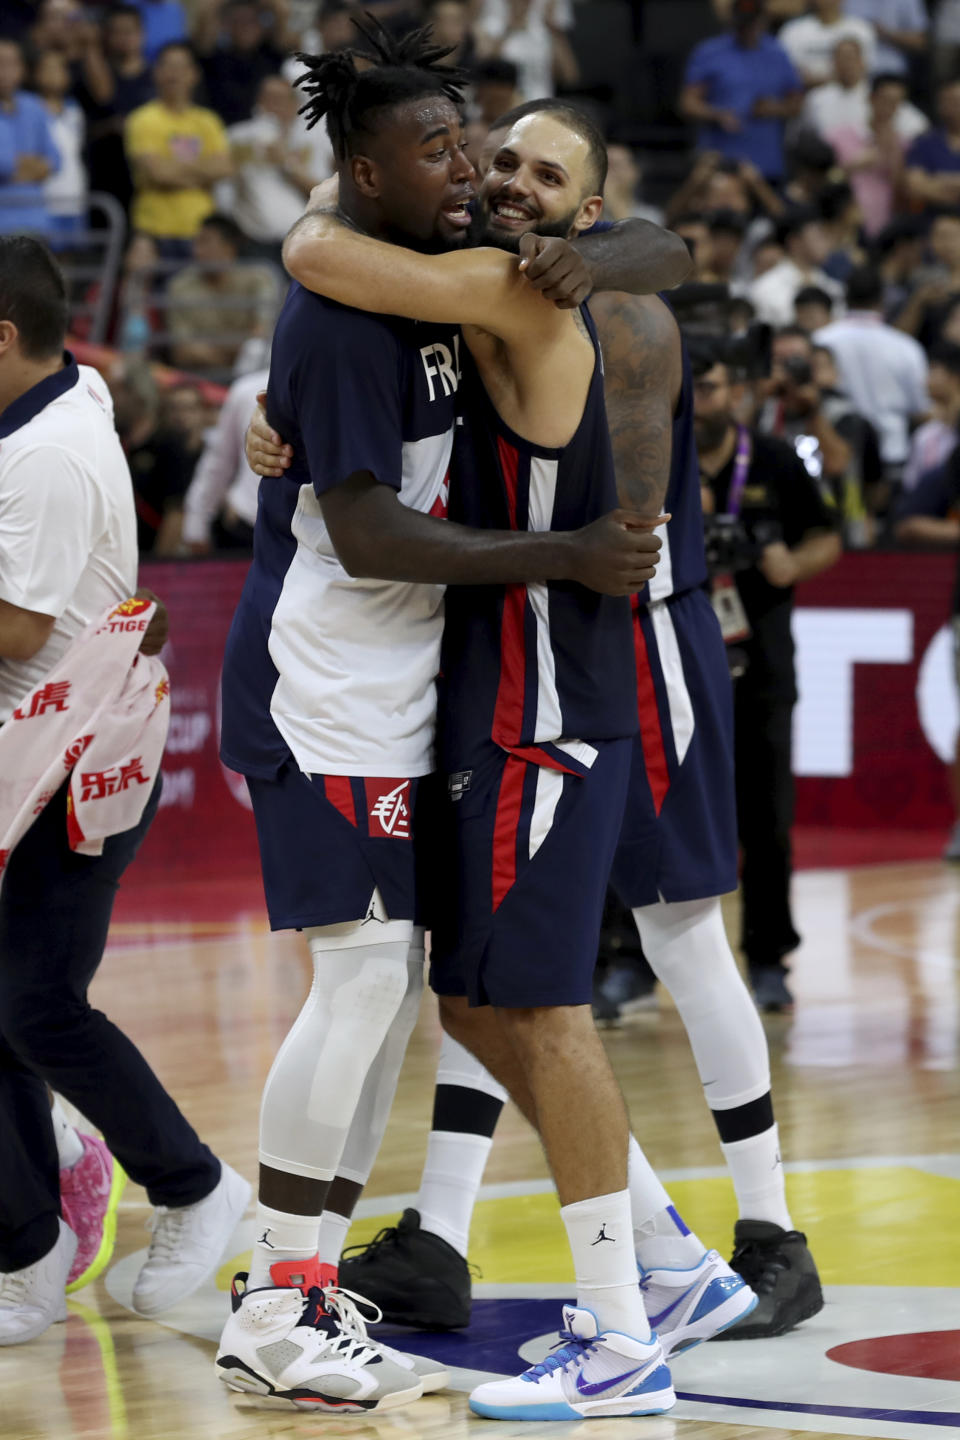 France's Mathias Lessort at left hugs France's Evan Fournier as they celebrate defeating United States during a quarterfinal match for the FIBA Basketball World Cup in Dongguan in southern China's Guangdong province on Wednesday, Sept. 11, 2019. France defeated United States 89-79. (AP Photo/Ng Han Guan)